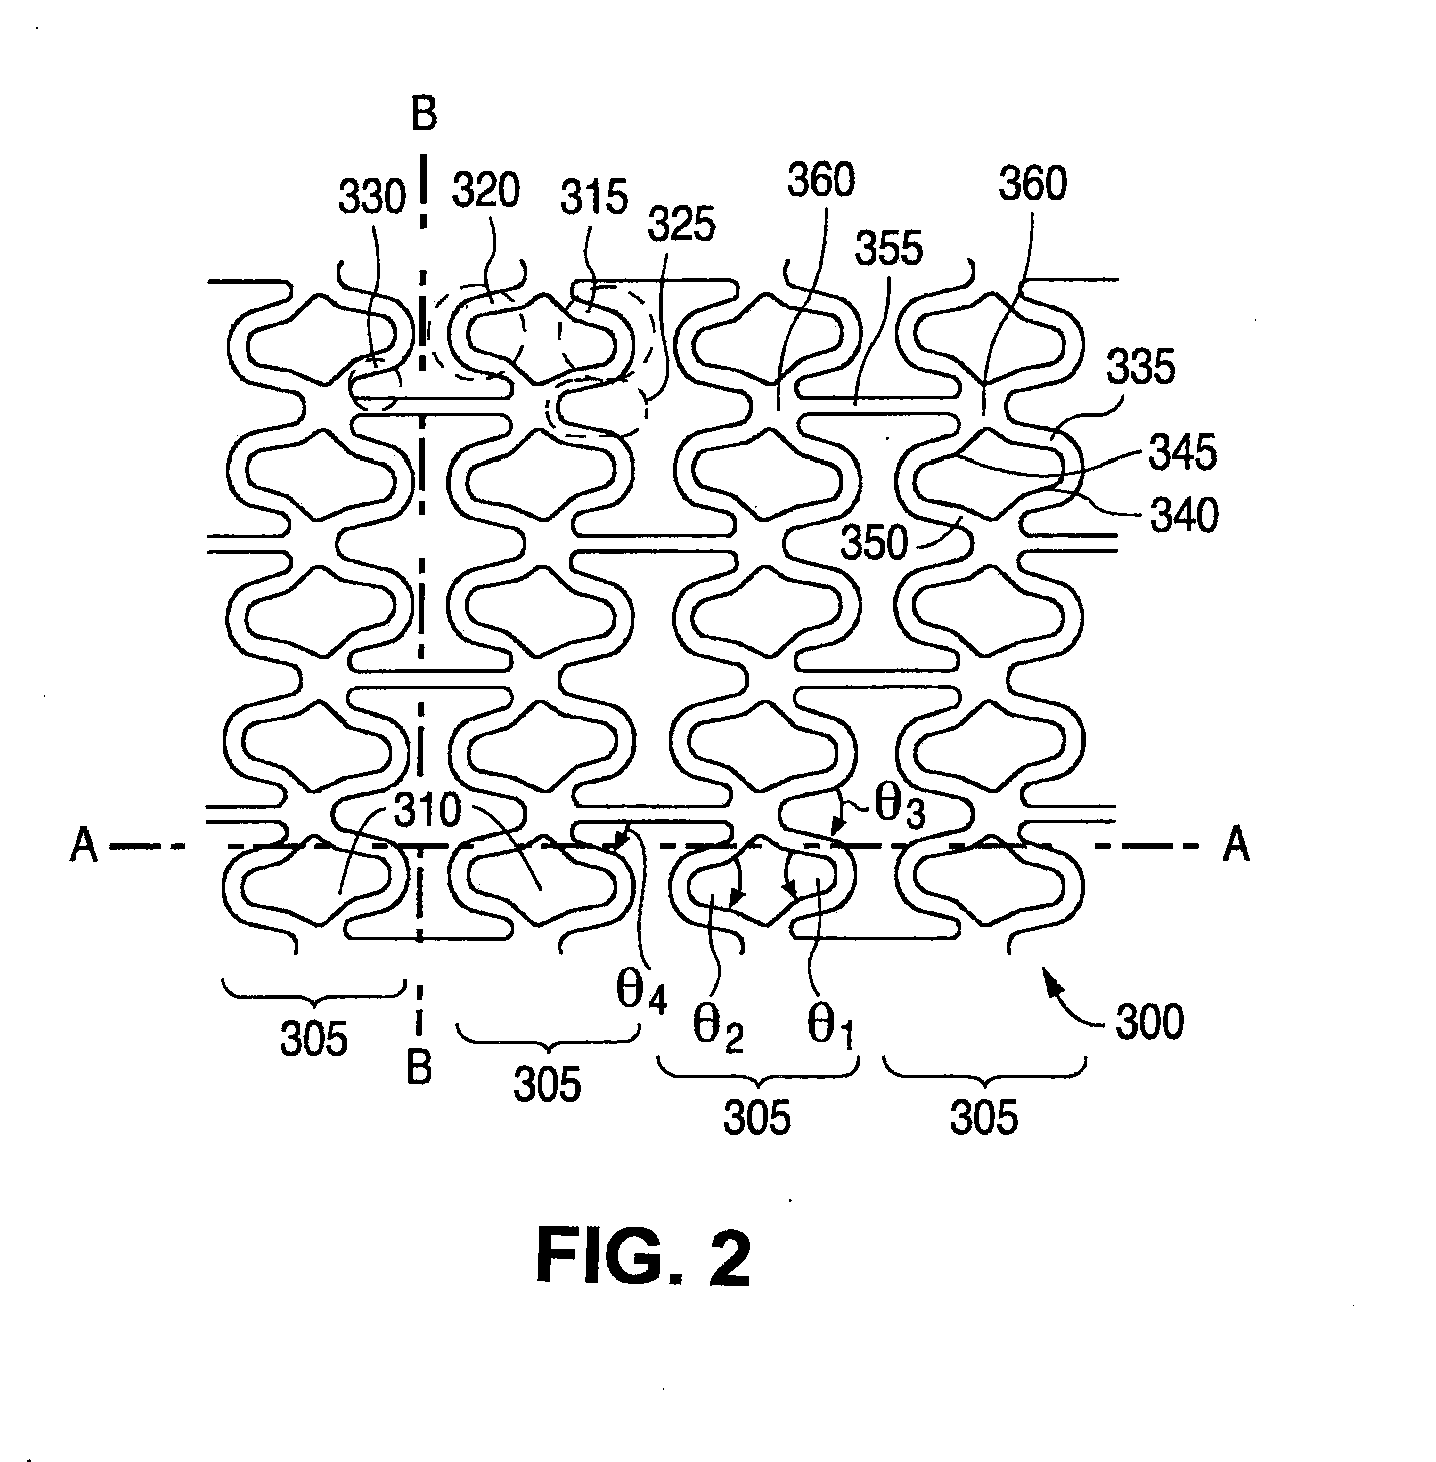 Methods To Increase Fracture Resistance Of A Drug-Eluting Medical Device